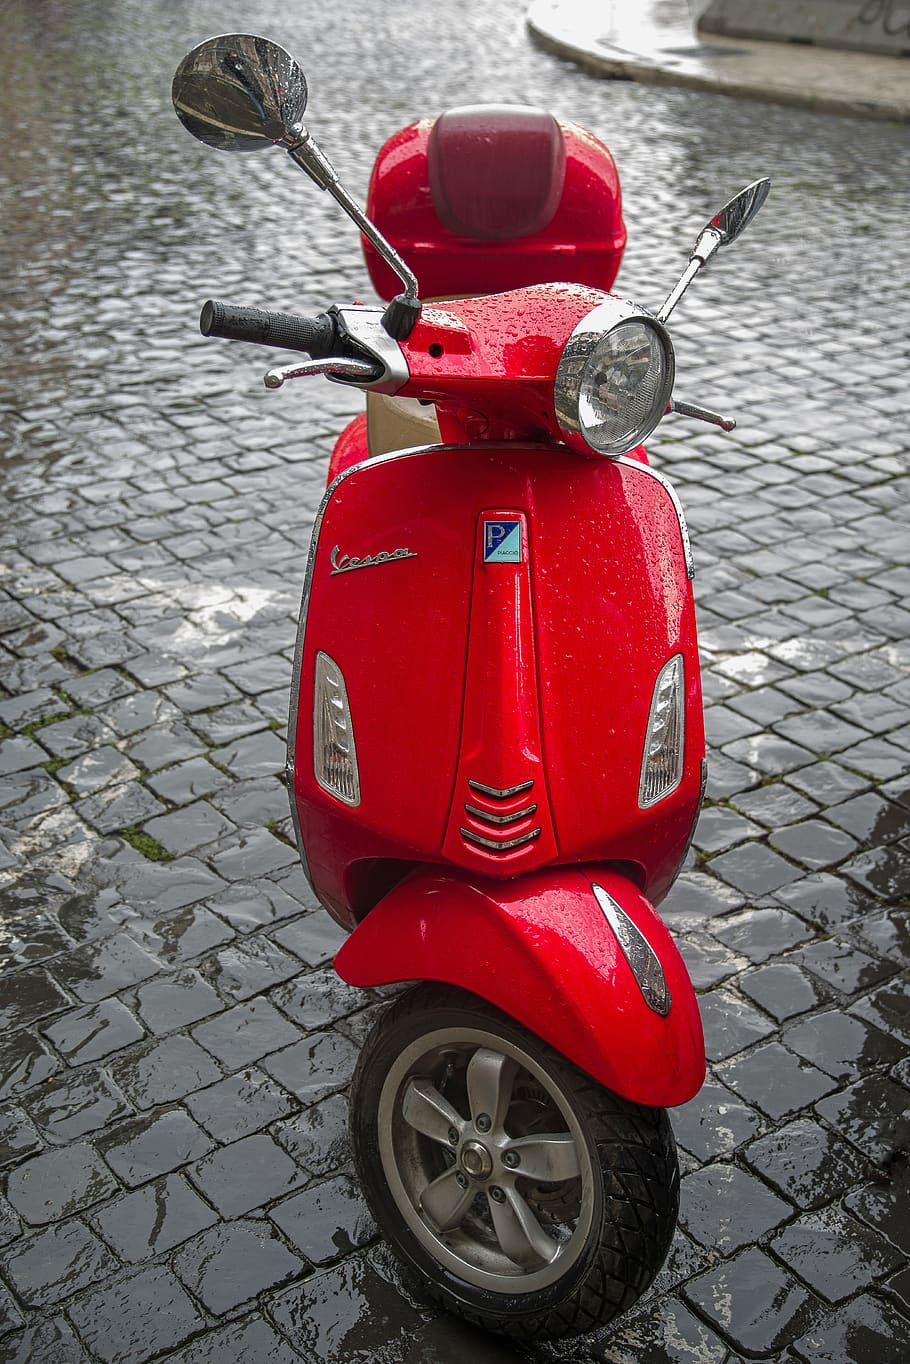 Vespa, Scooter, Motorcycle, Red, Vehicle, Motorbike, - Vespa Scooter Red , HD Wallpaper & Backgrounds